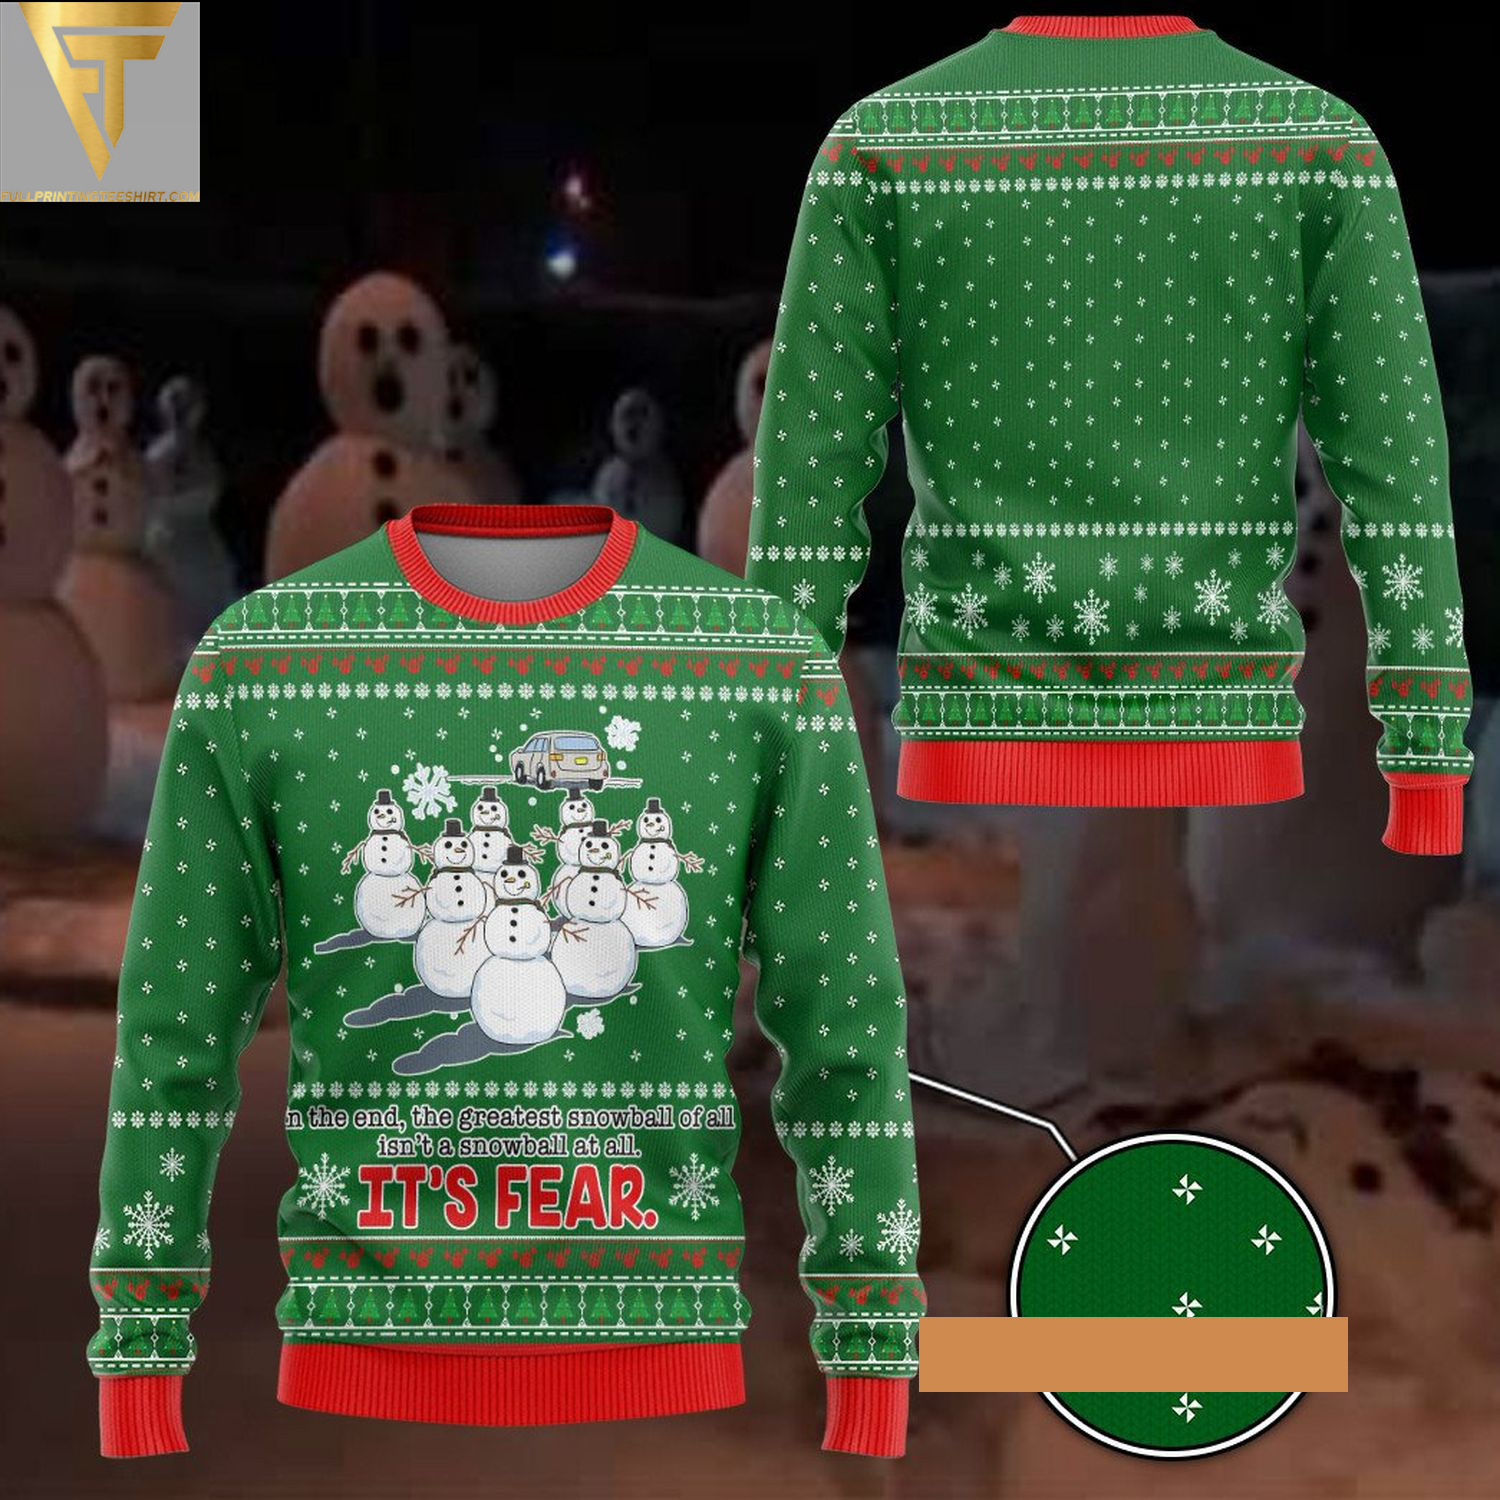 The office the greatest snowball ugly christmas sweater - Copy (2)